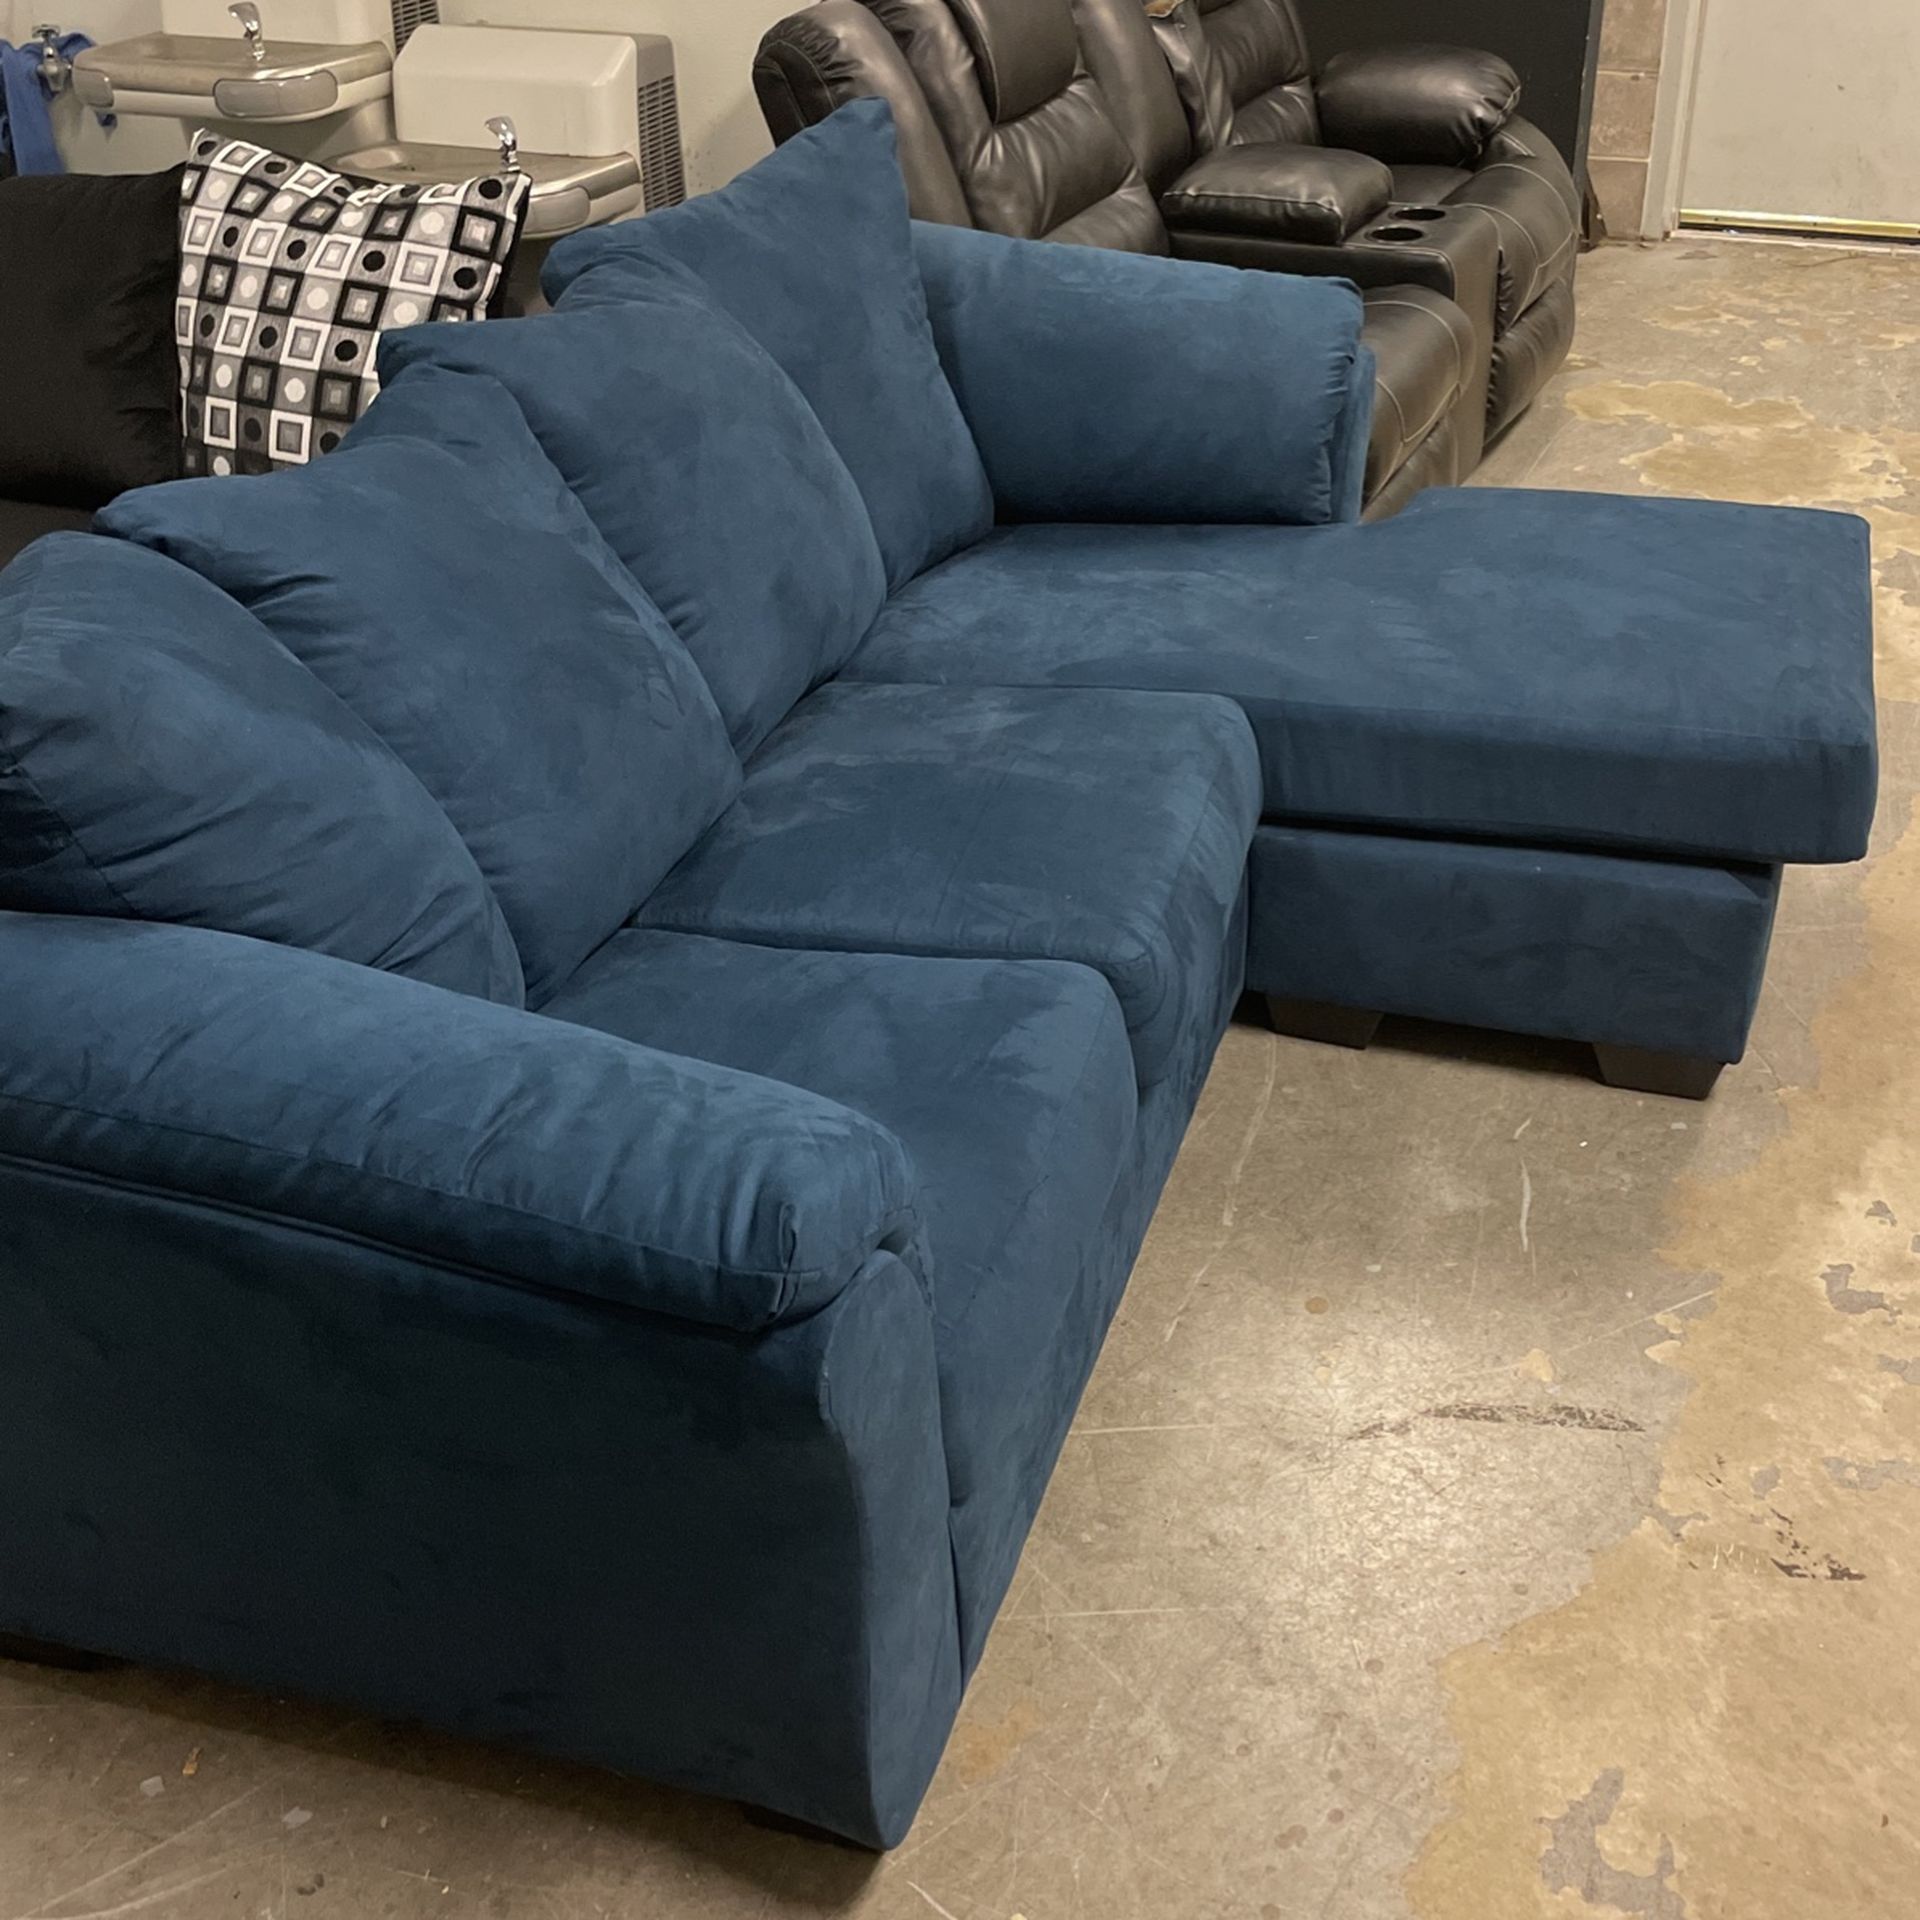 Brand New Sectionals. Blue, Gray, and Black. (SAME DAY DELIVERY)